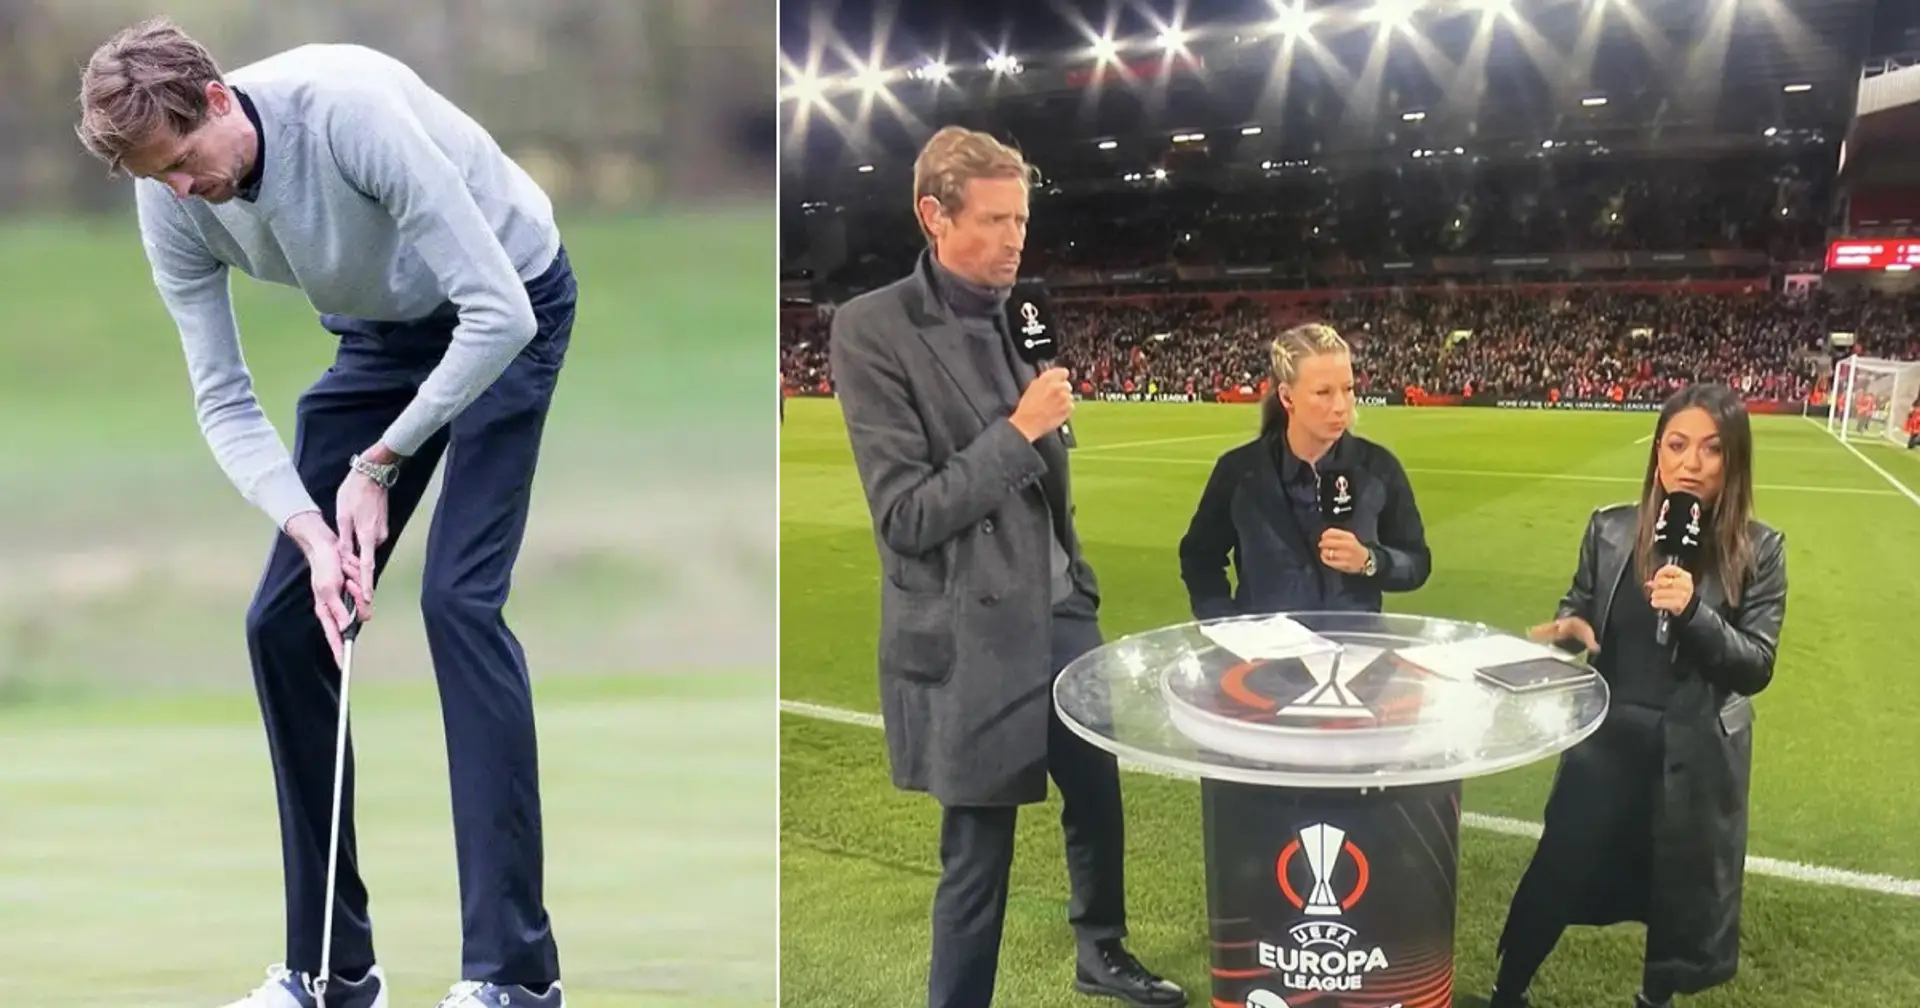 'It is really off-putting': Peter Crouch looks WAY TOO TALL compared to female TNT pundits during Liverpool game